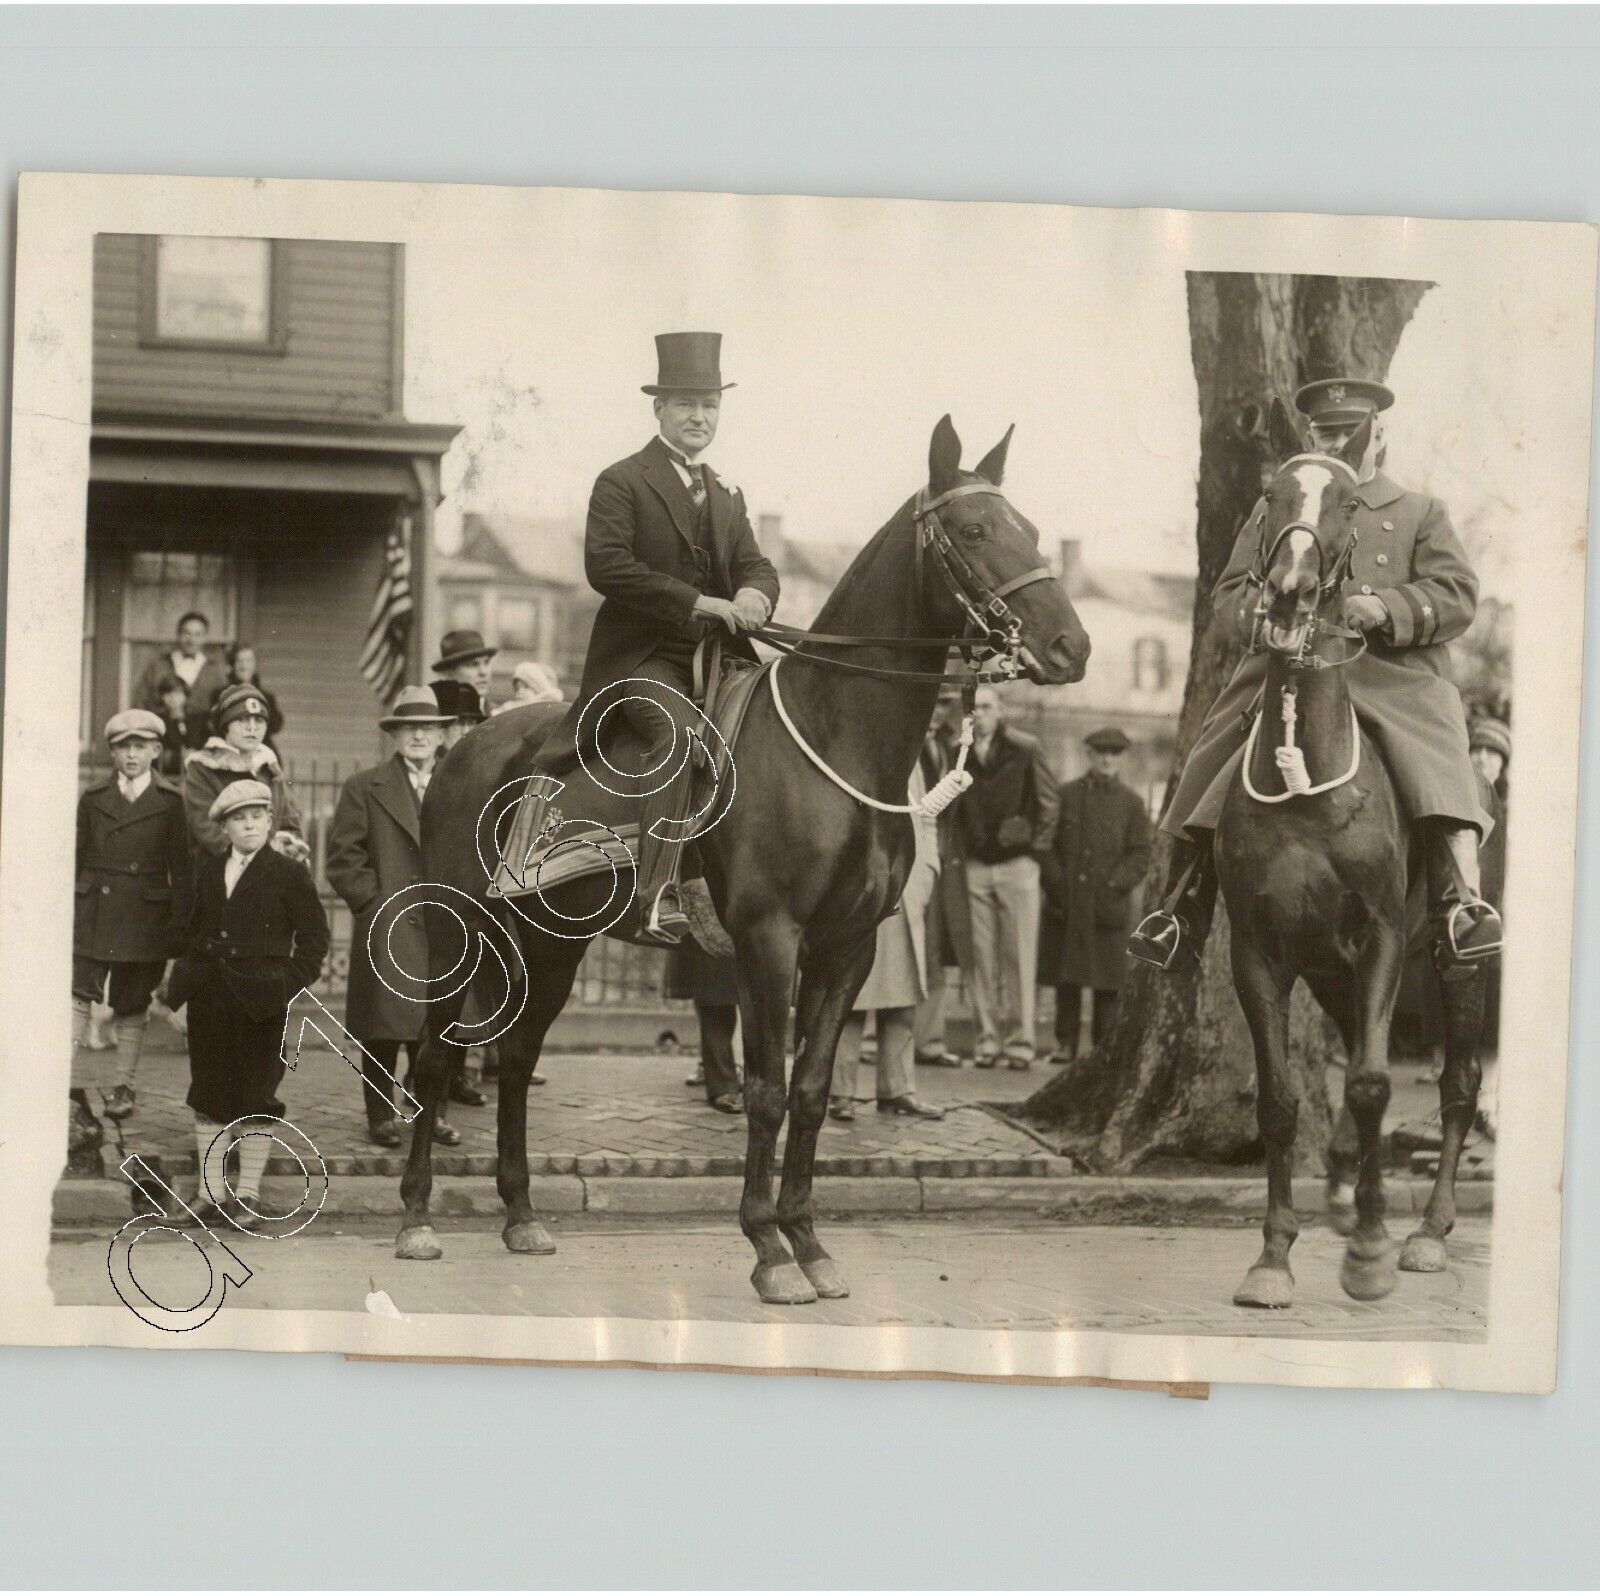 Gov. HENRY MOORE on Horse in TRENTON, New Jersey 1926 Press Photo US